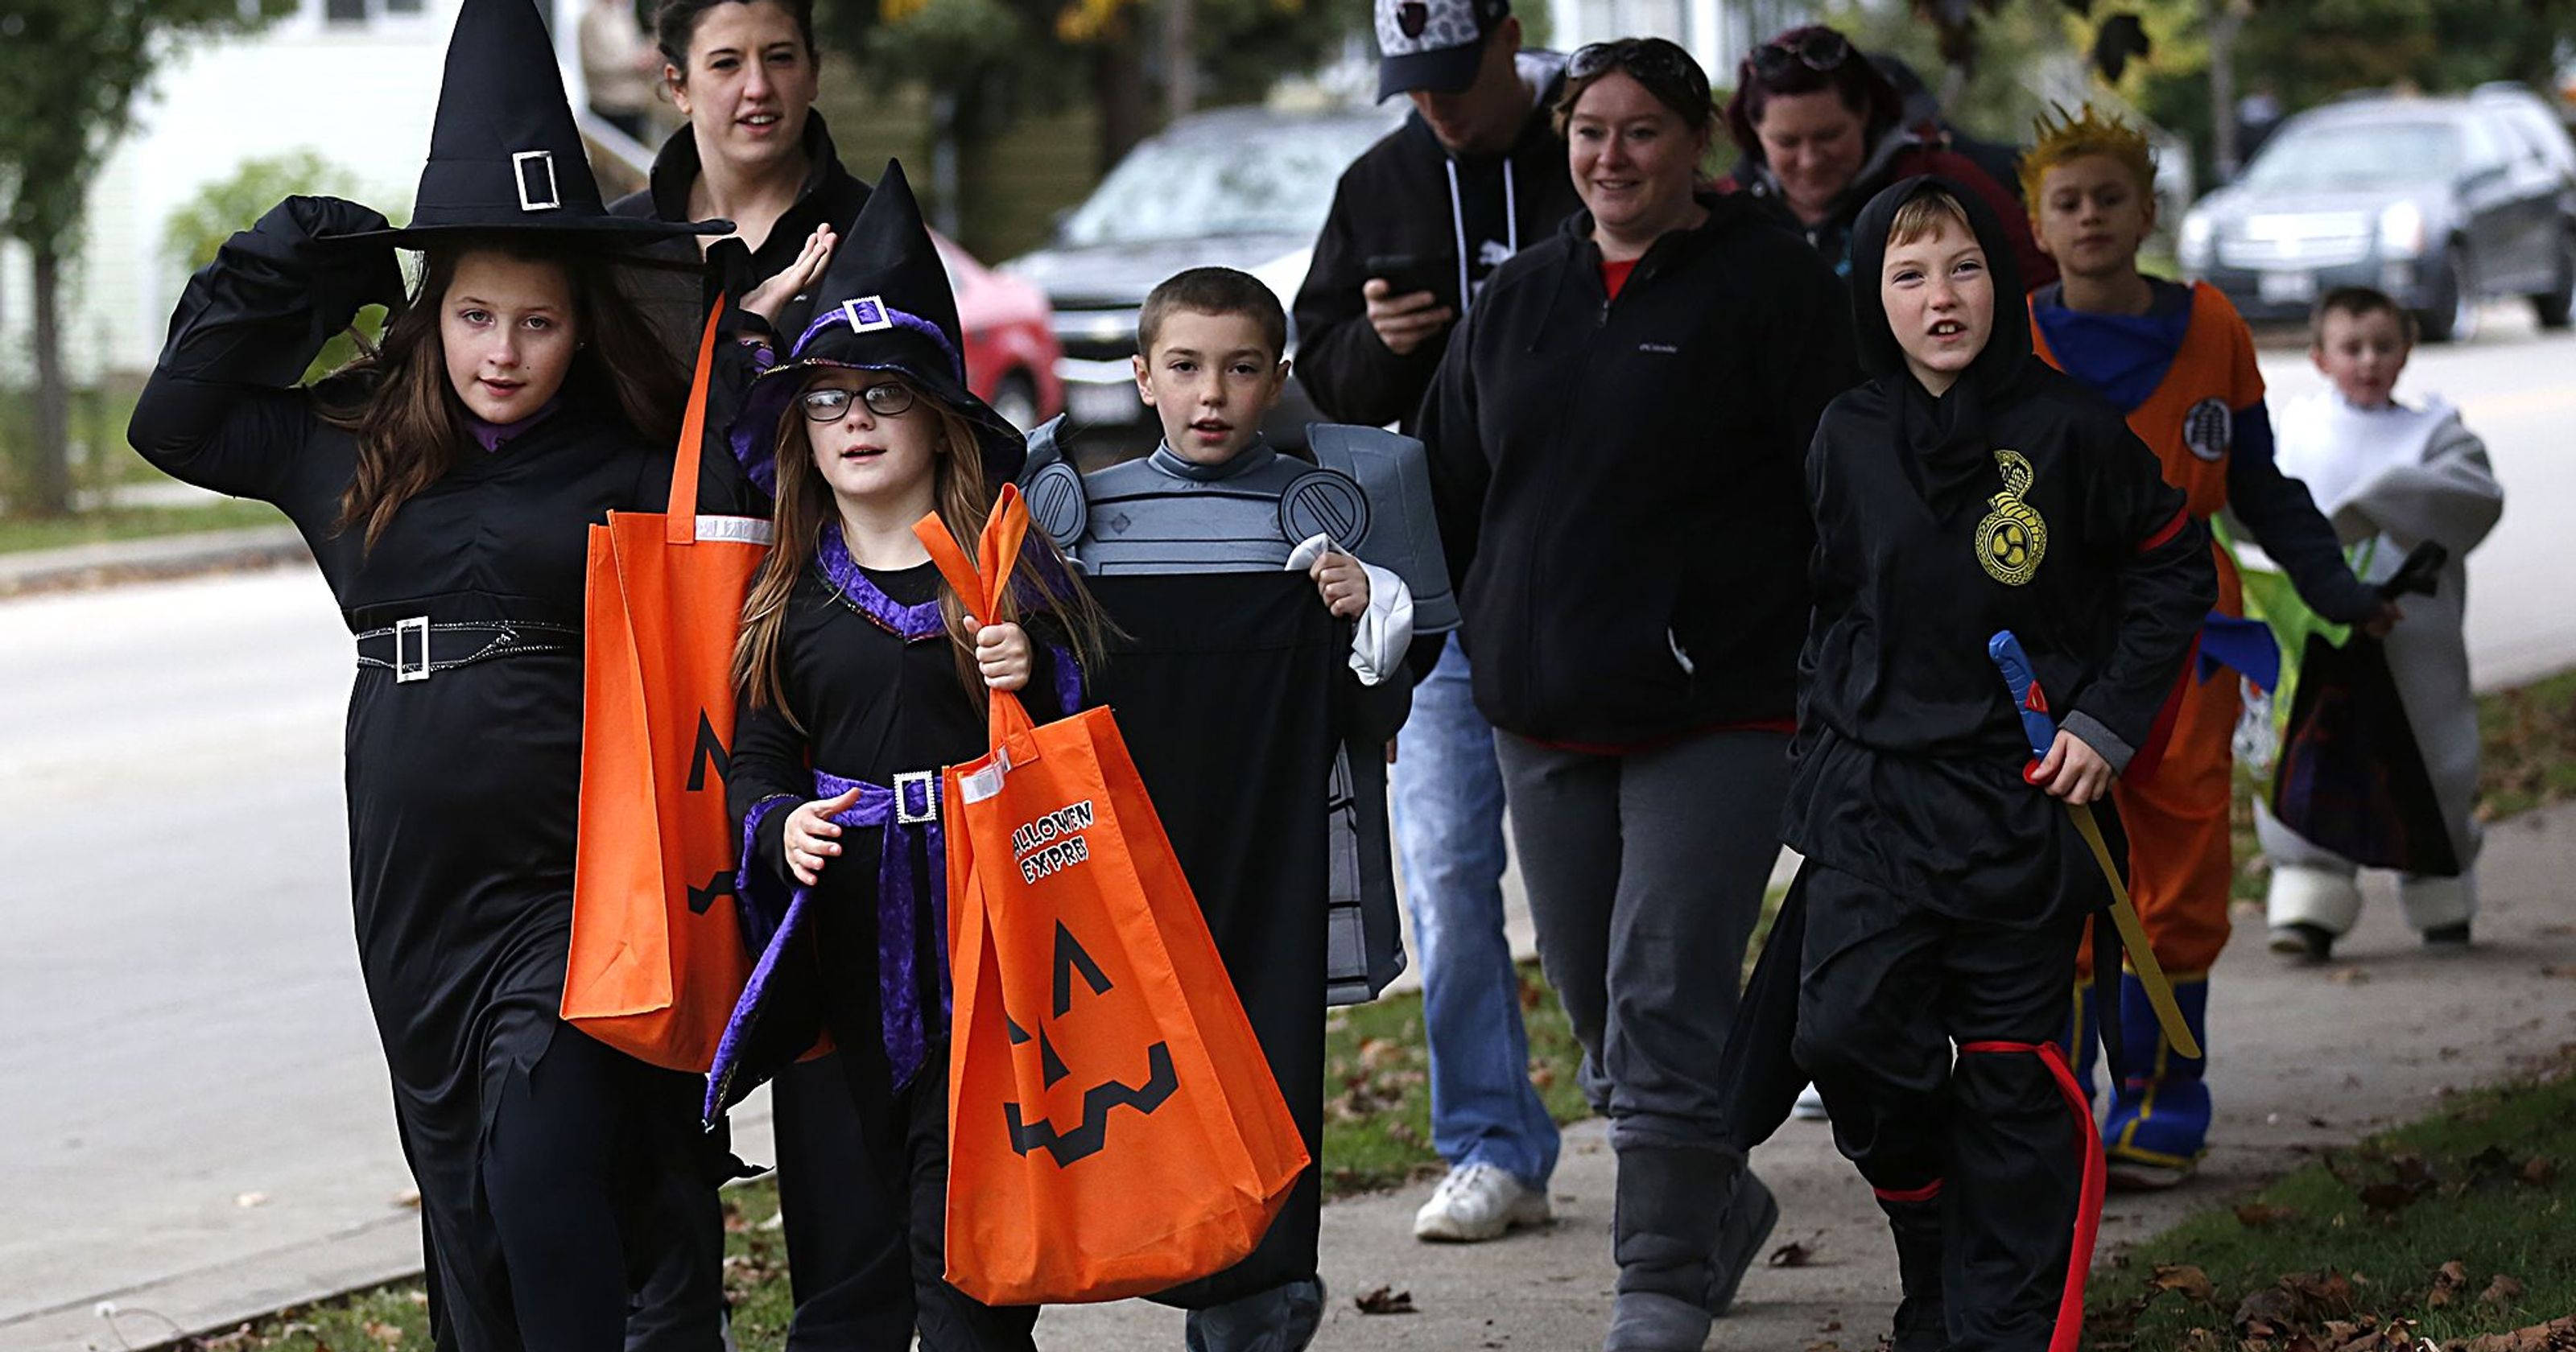 Cities across the US are prohibiting teenagers to trick-or-treat